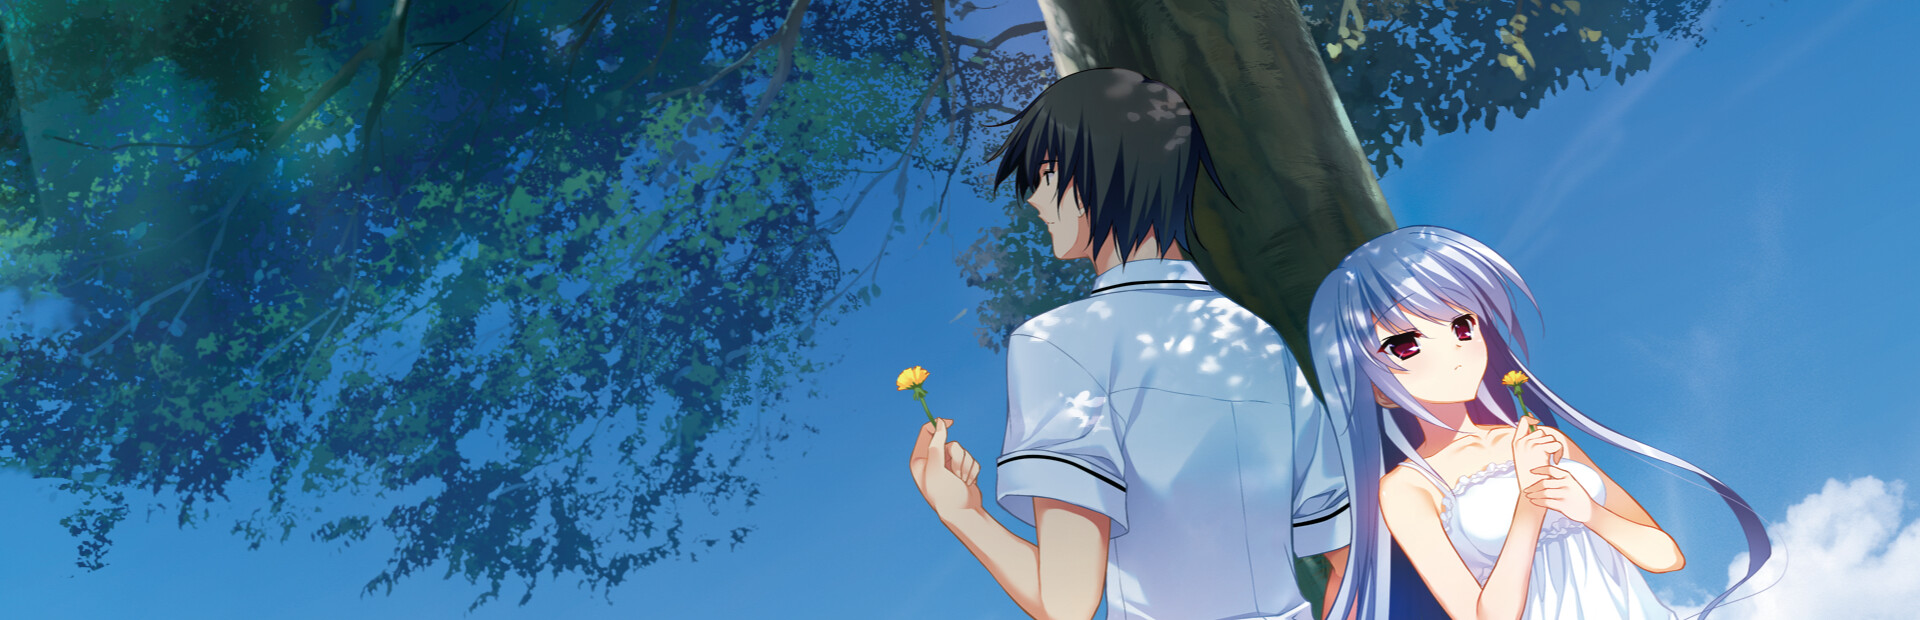 The Eden of Grisaia cover image